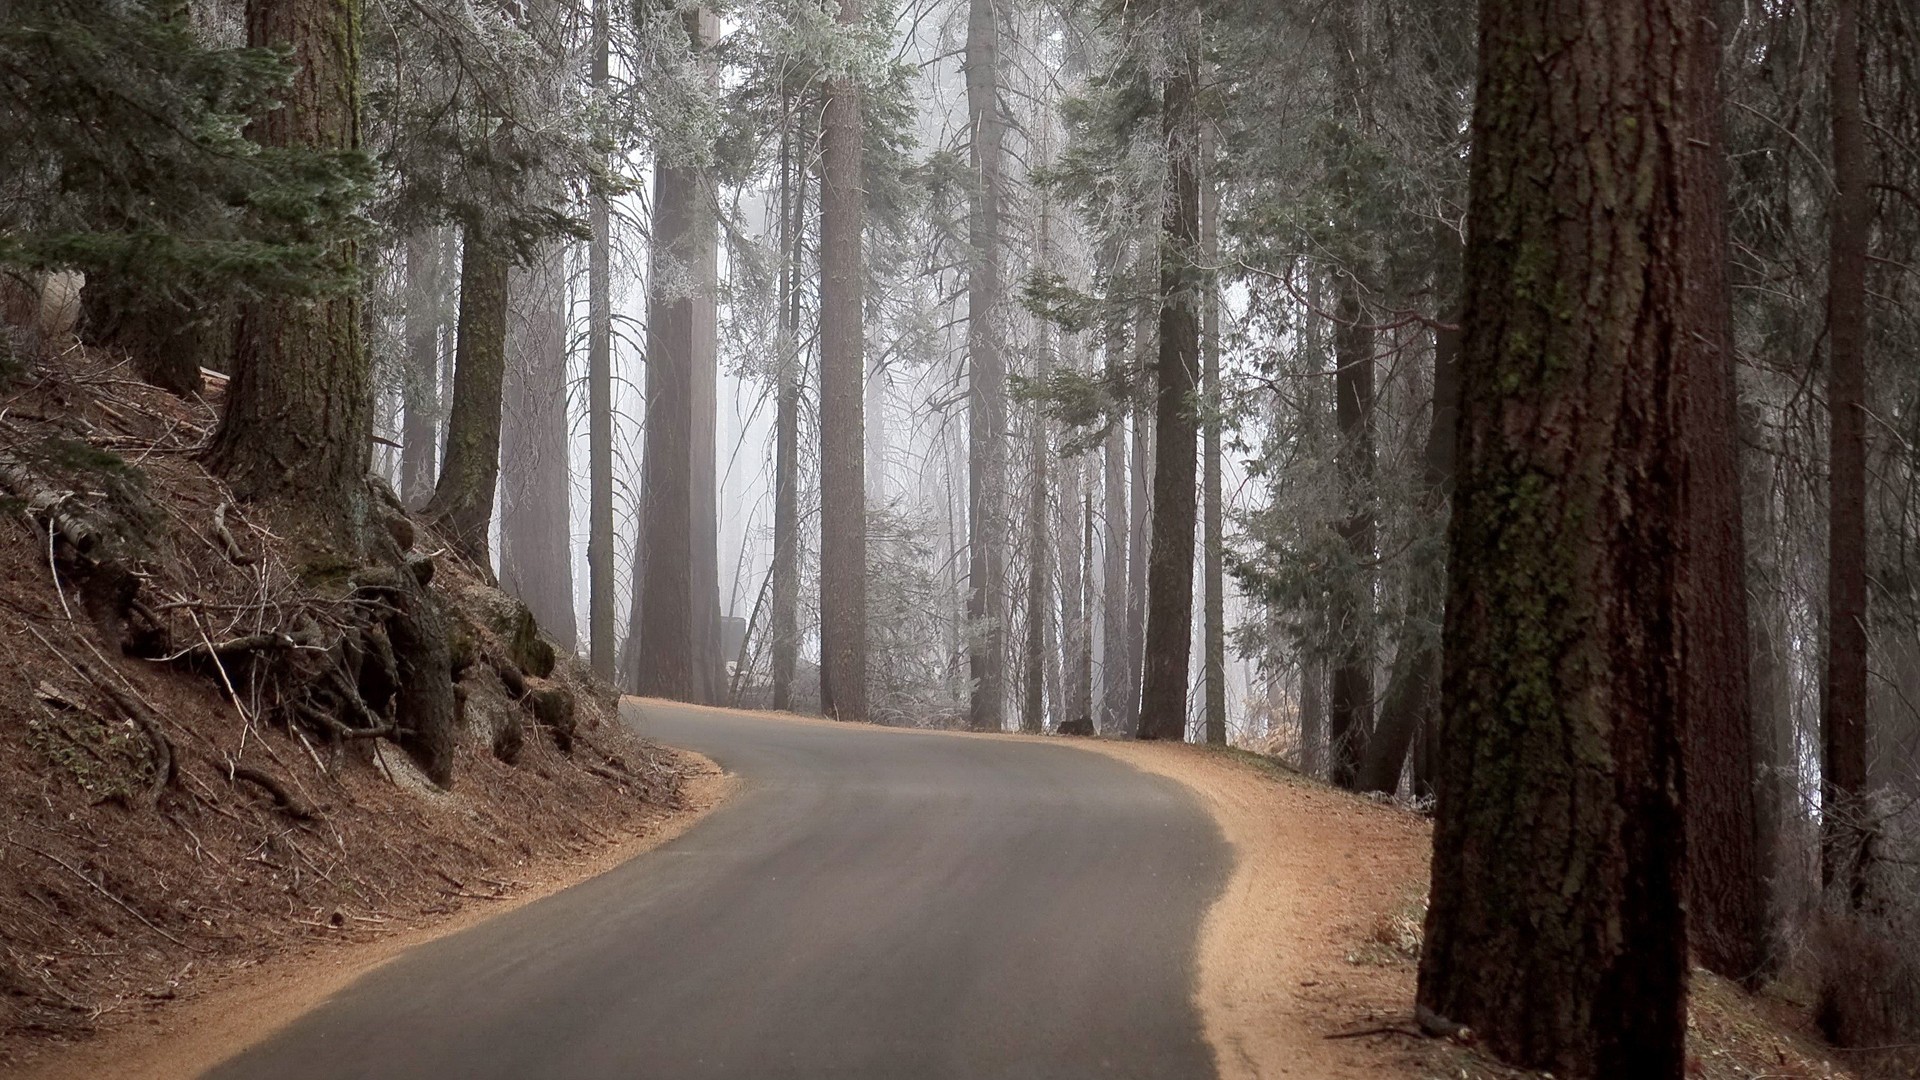 General 1920x1080 road forest trees outdoors